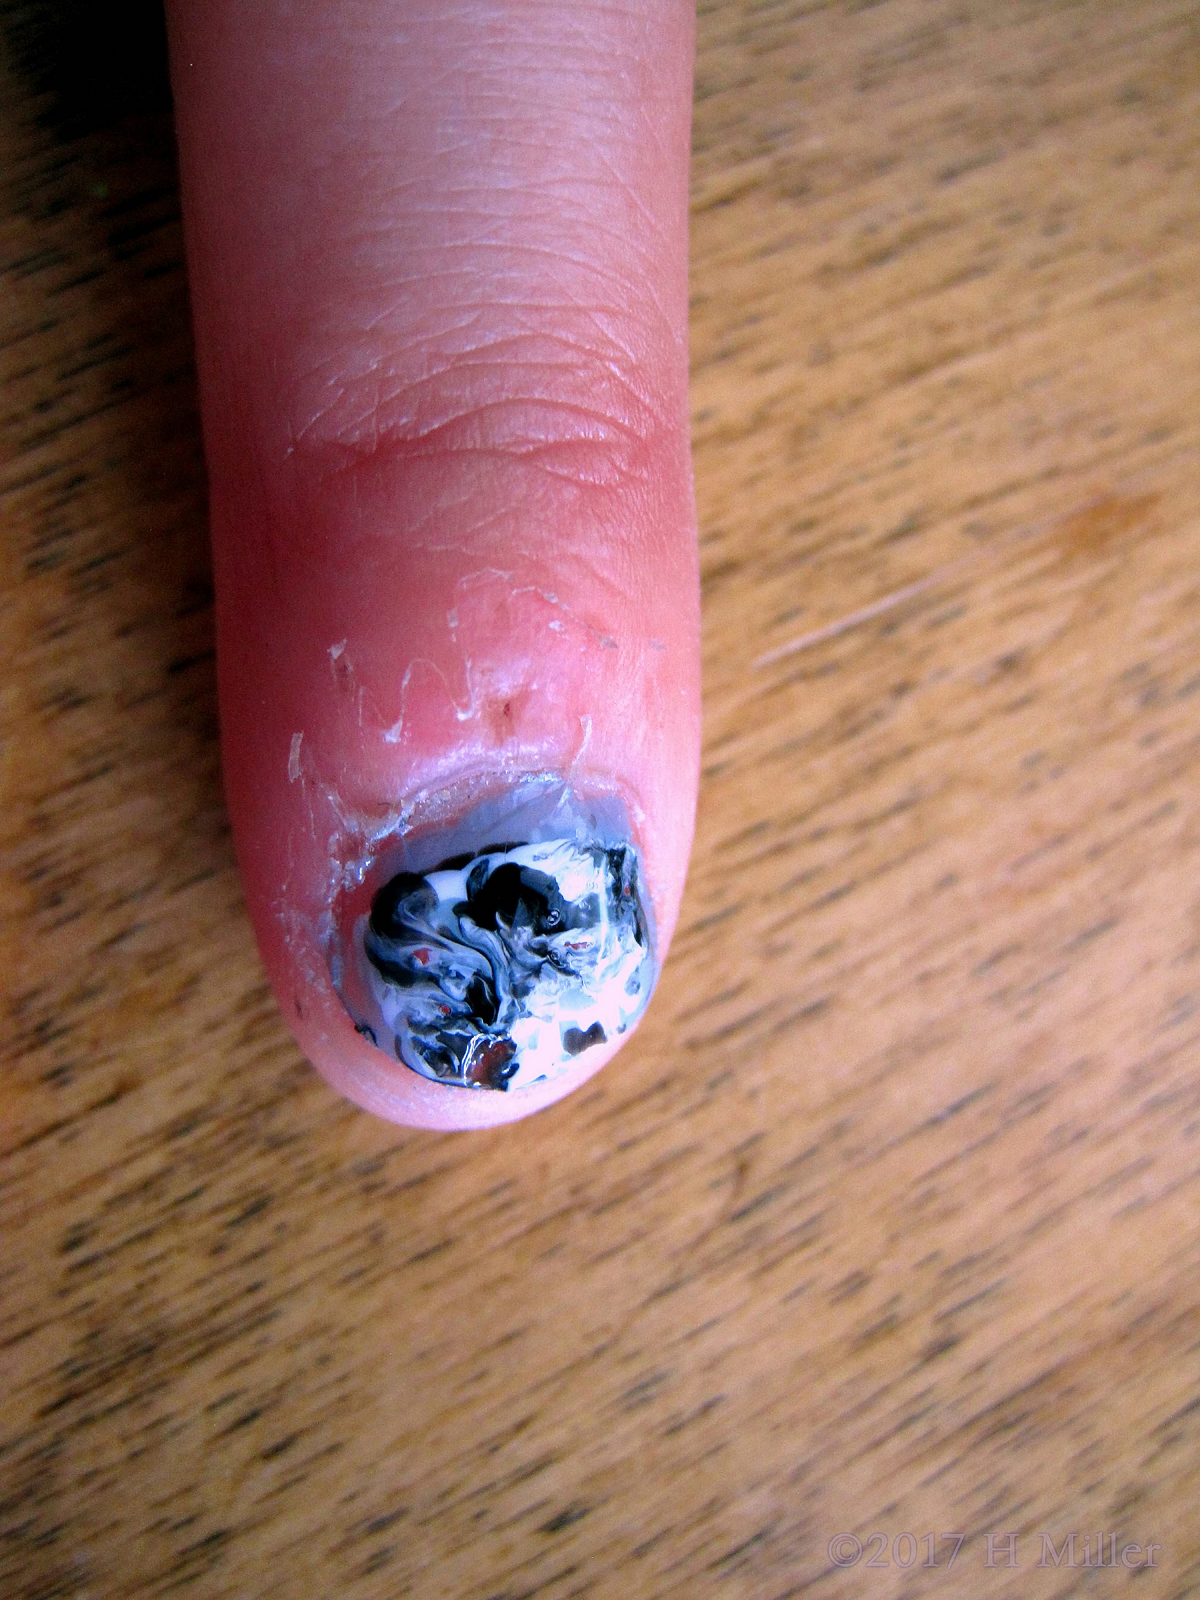 One More Pic Of This Amazing Marbled Nail Design! 